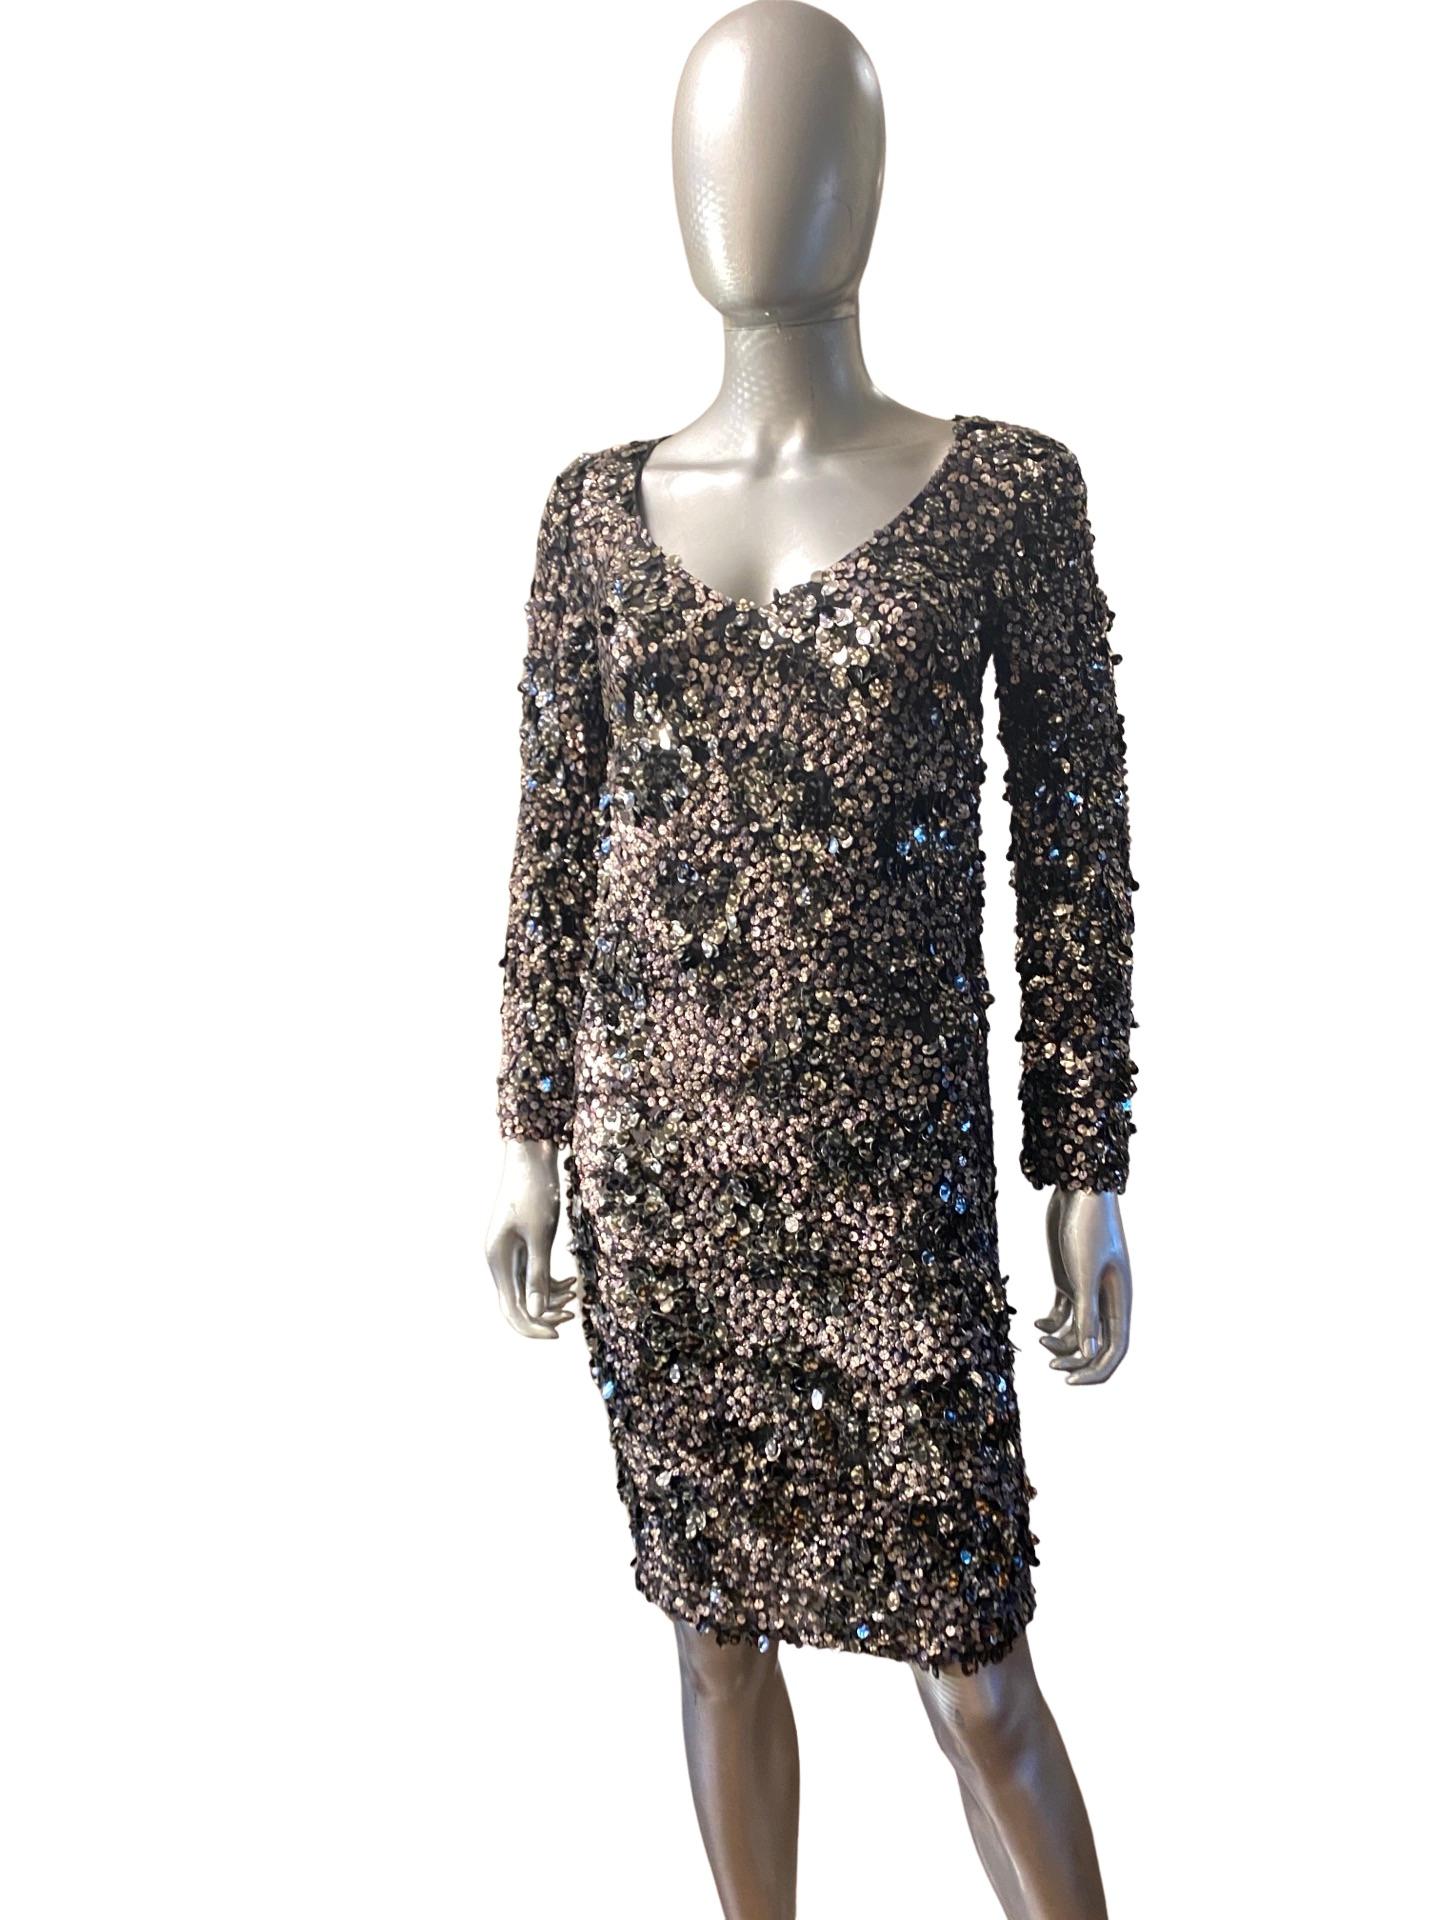 St John Couture Modern Silk Dress with 3D Shimmy  Sexy Dangling Sequins Size 2.  For Sale 2